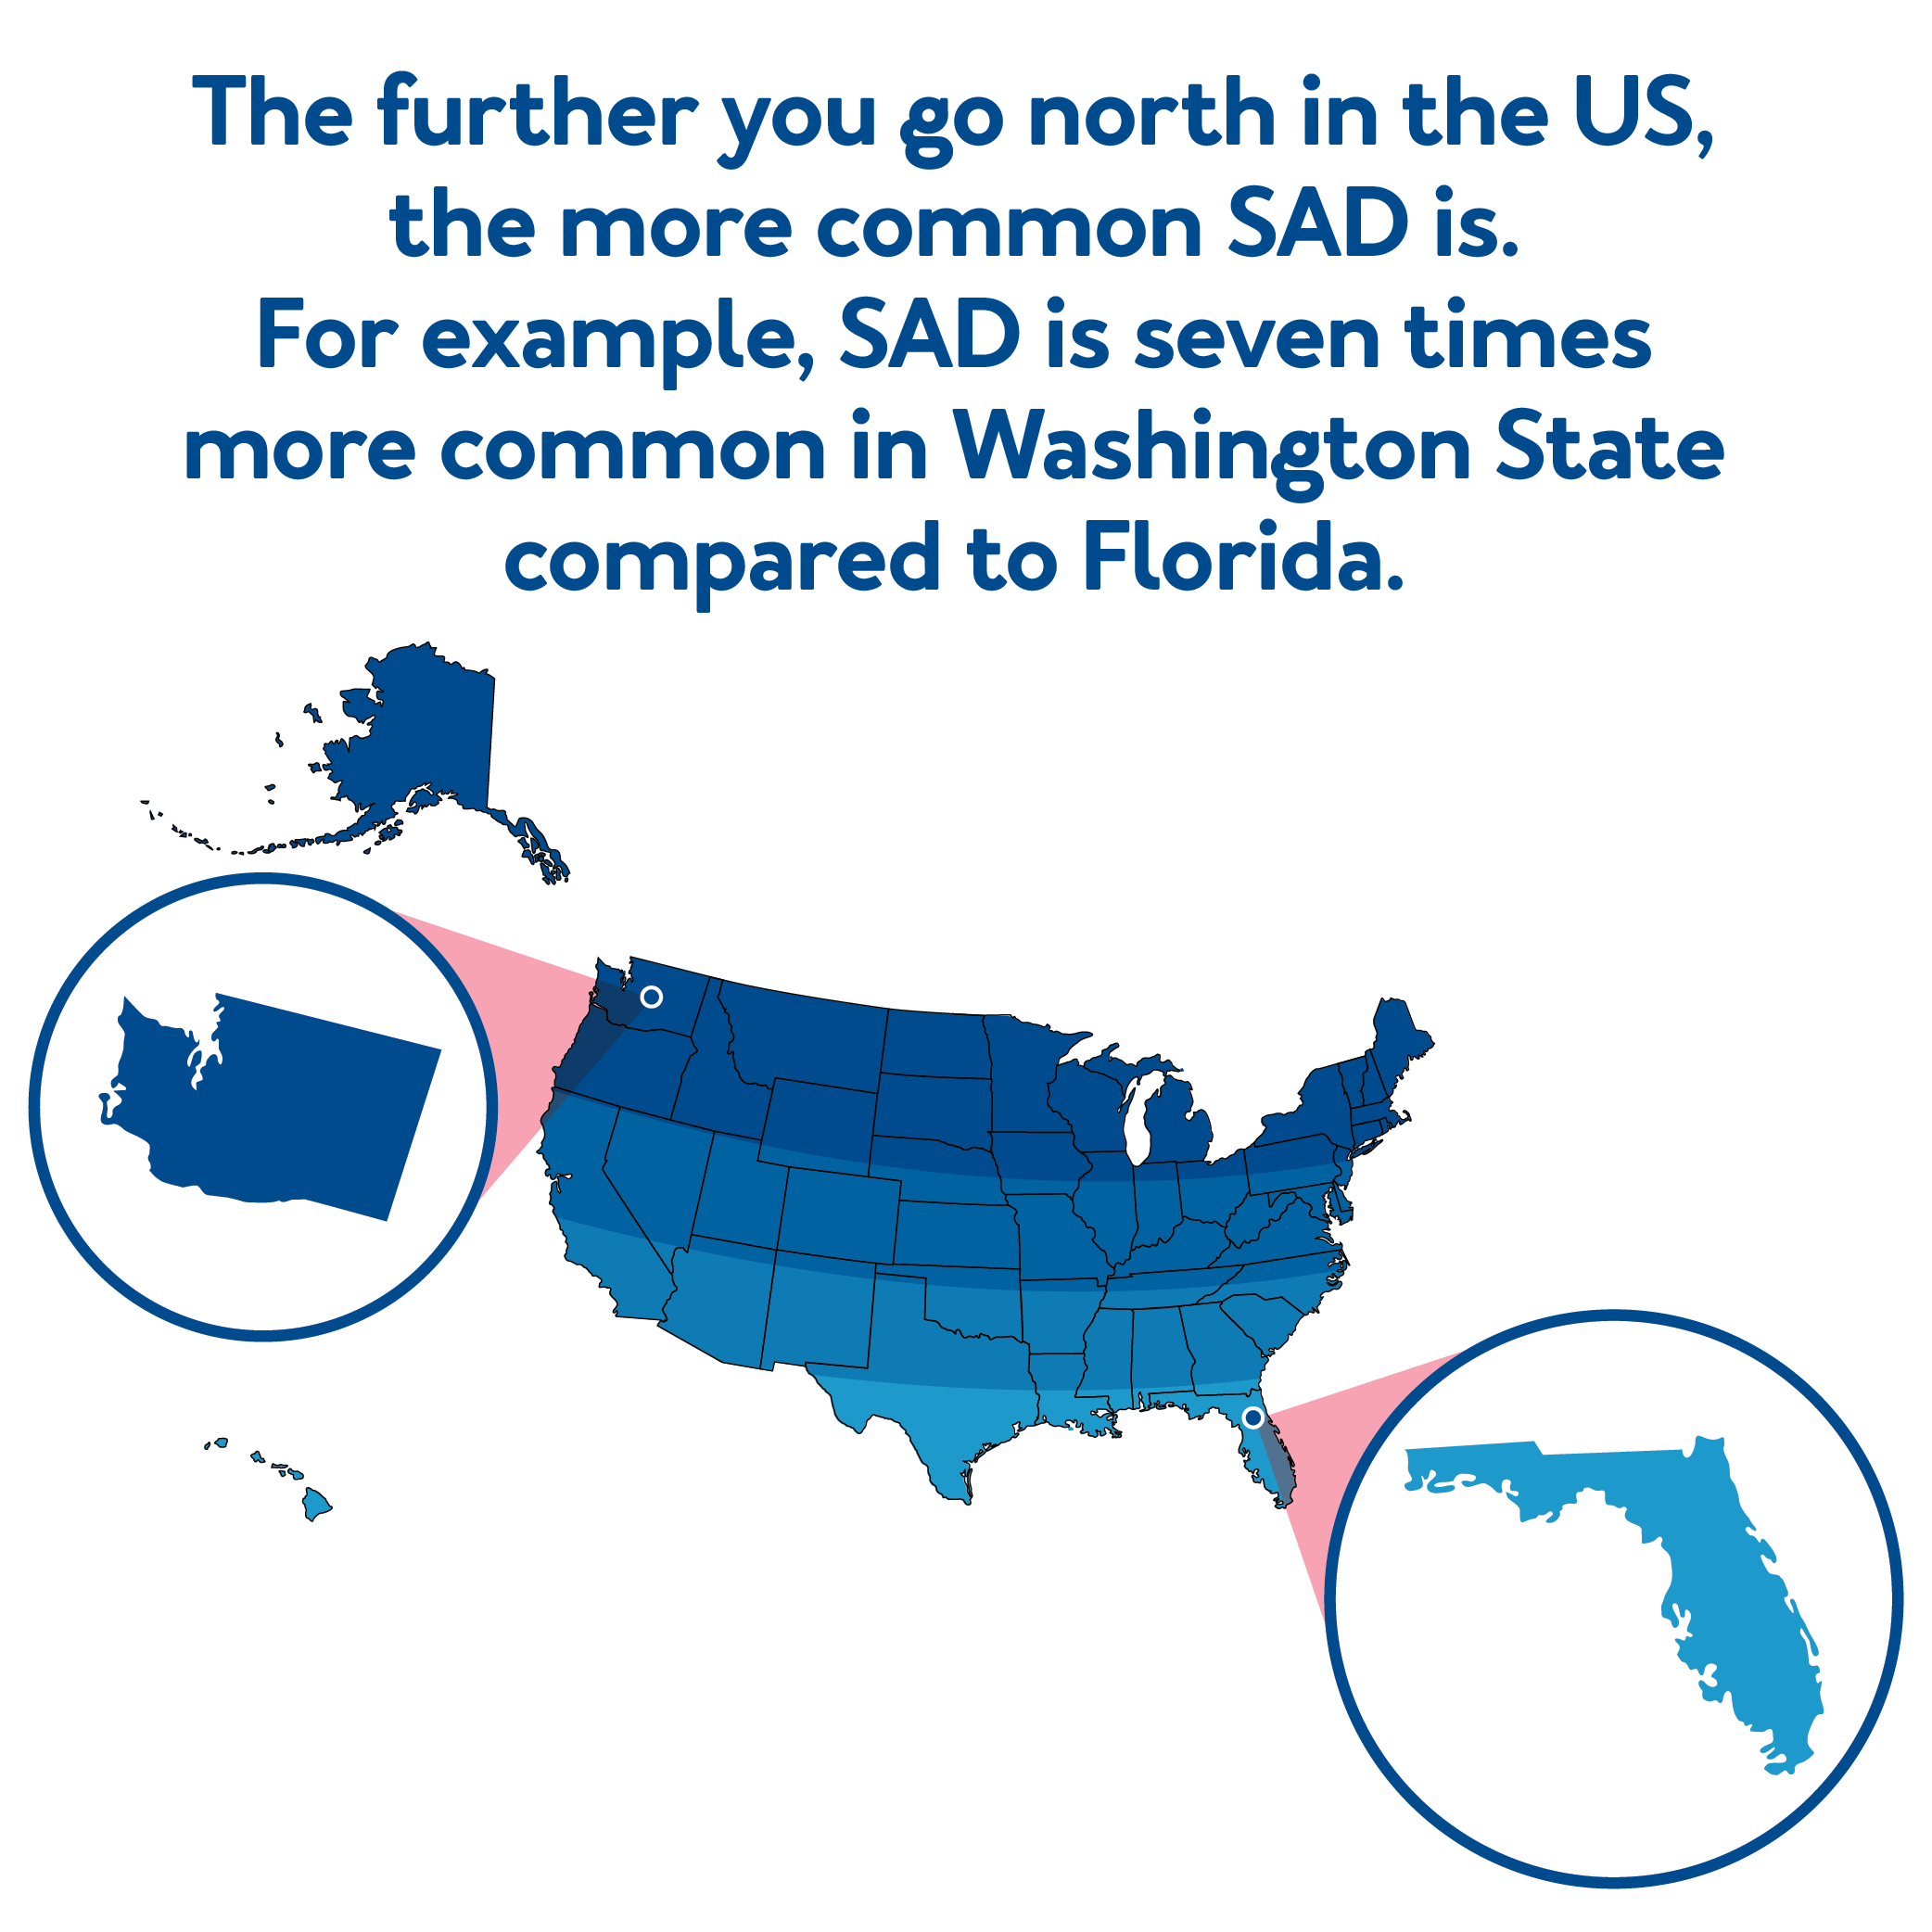 The further you go north in the U.S., the more common SAD is. For example, SAD is seven times more common in Washington State compared to Florida